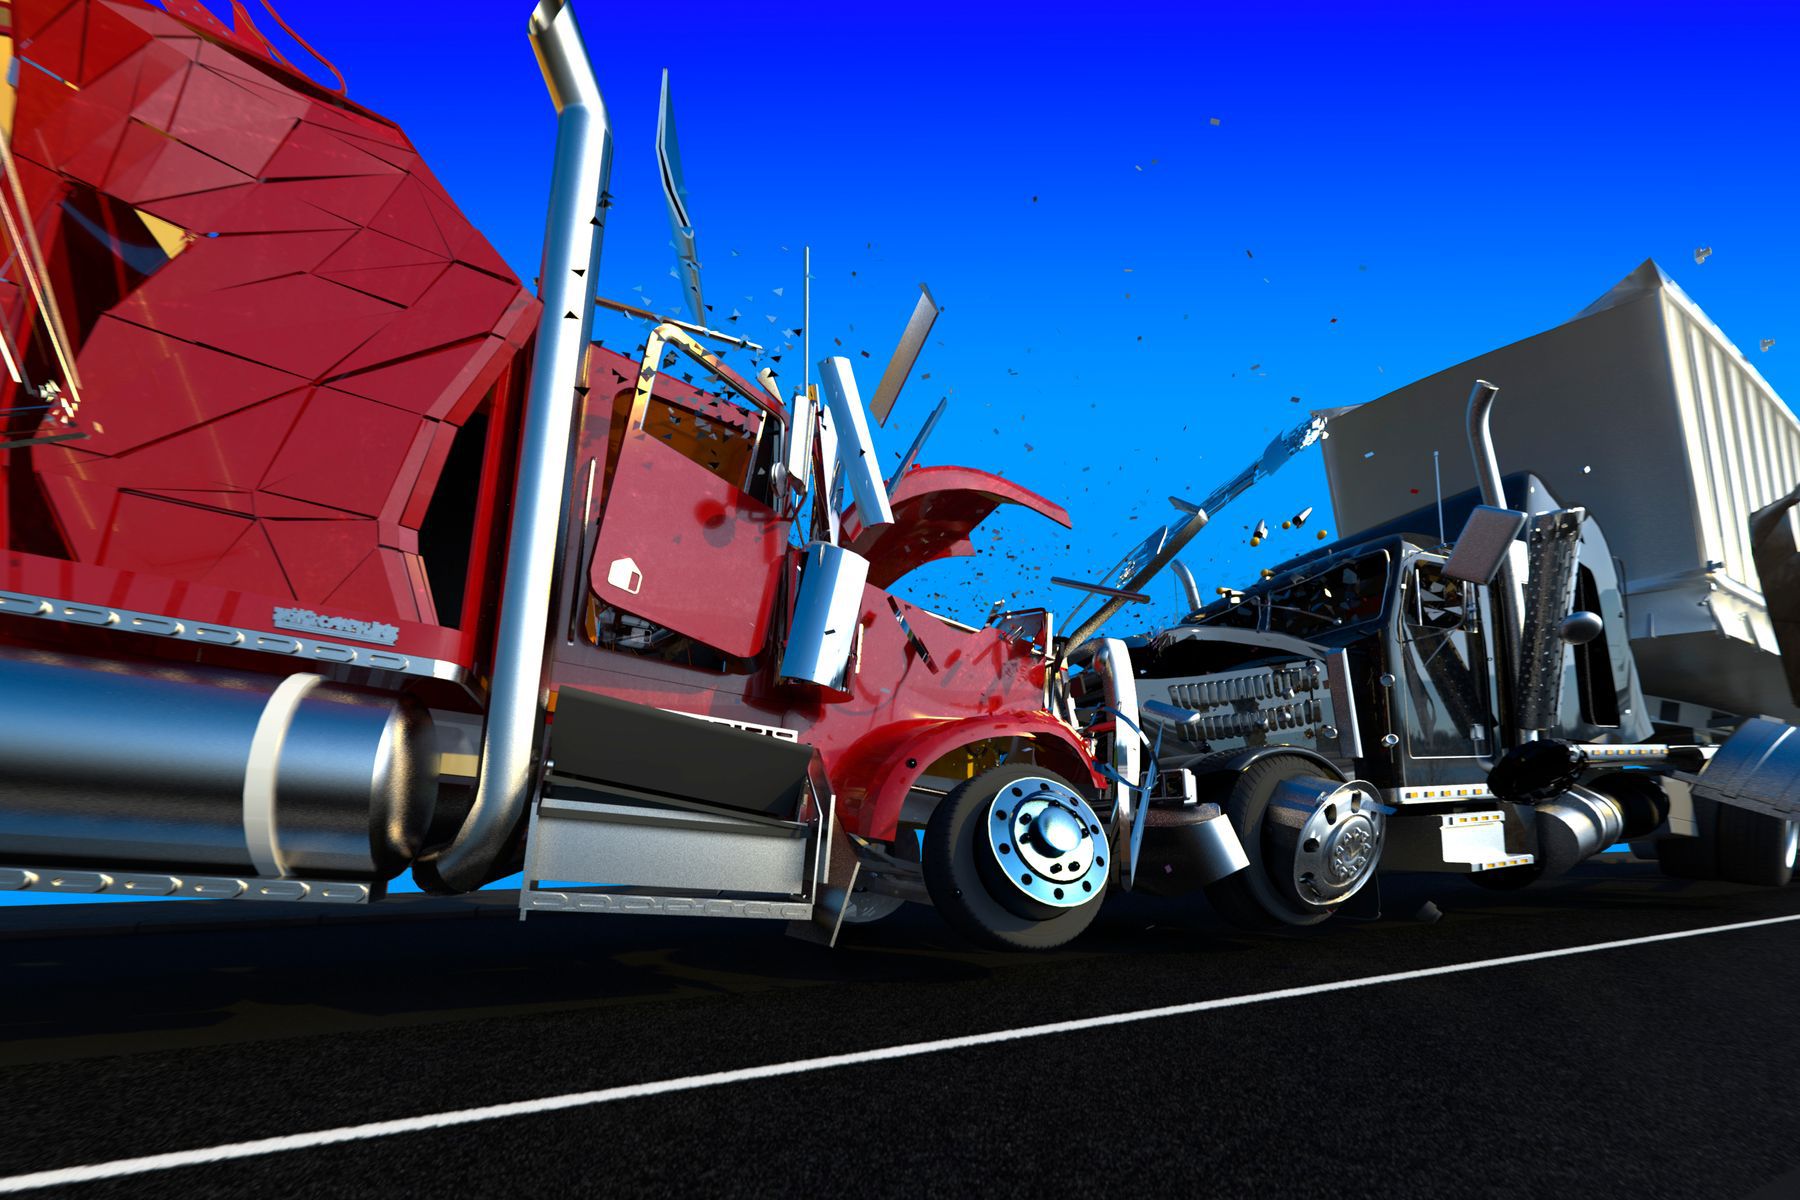 Truck Accident Injuries